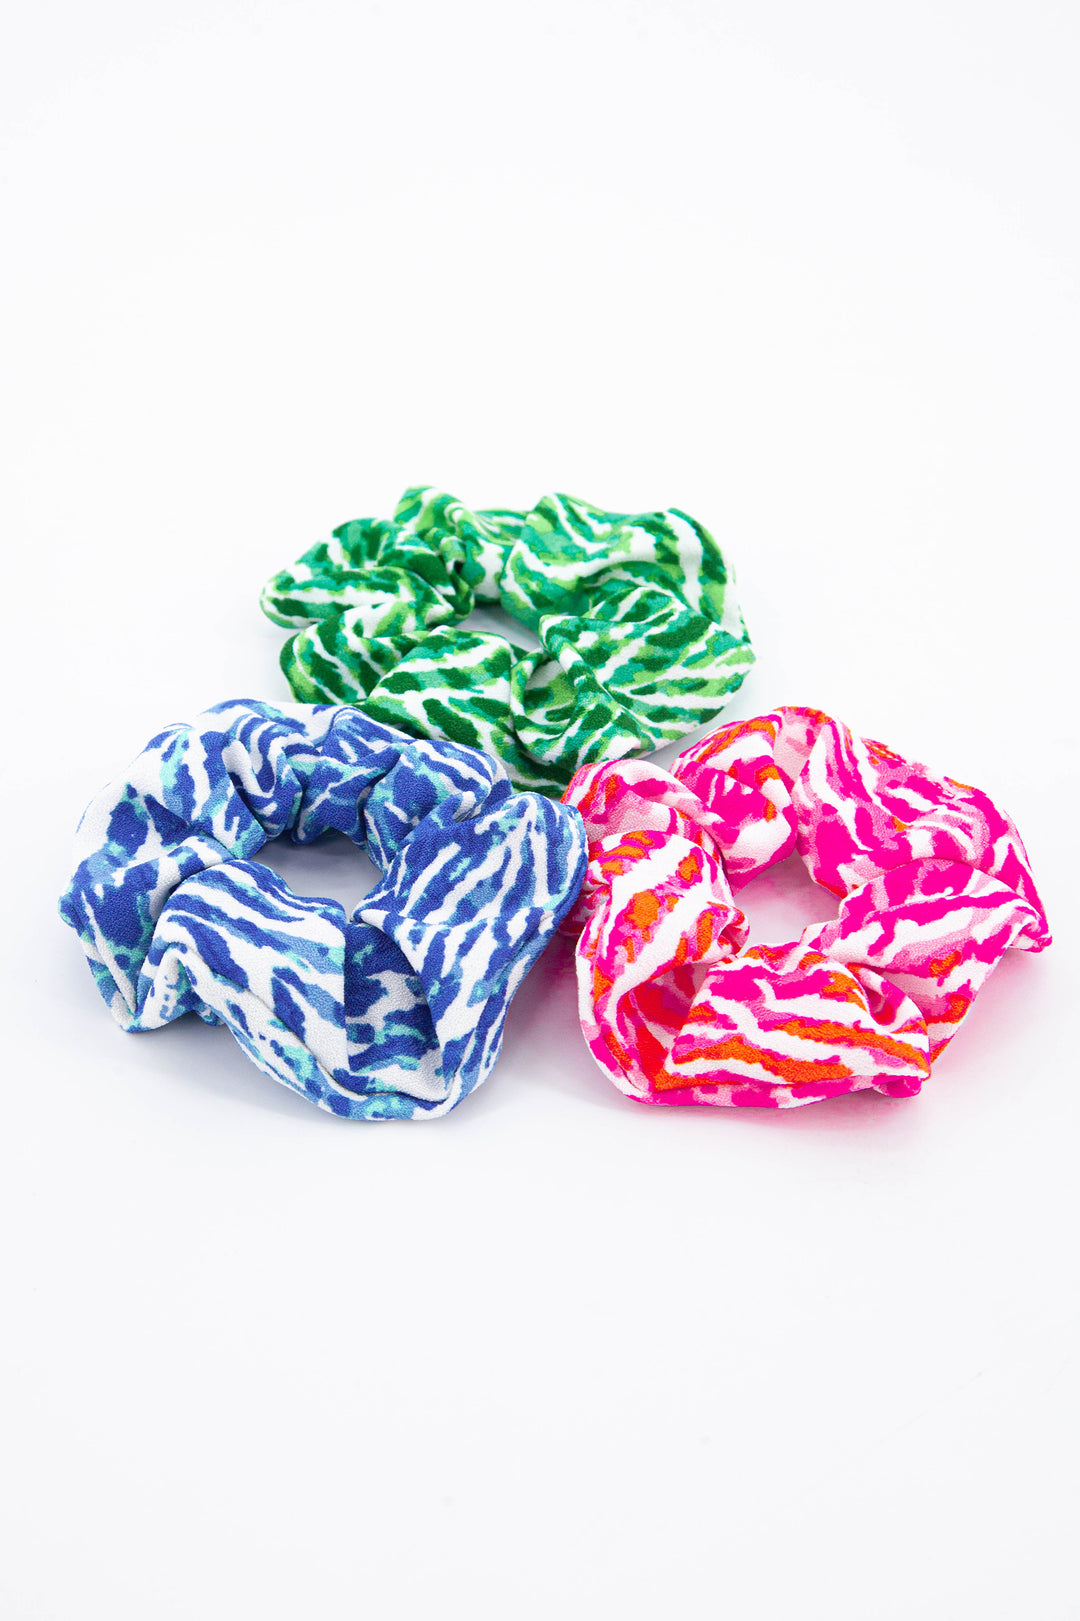 showing the three colourways of painted chevron pattern scrunchies, blue, pink and green